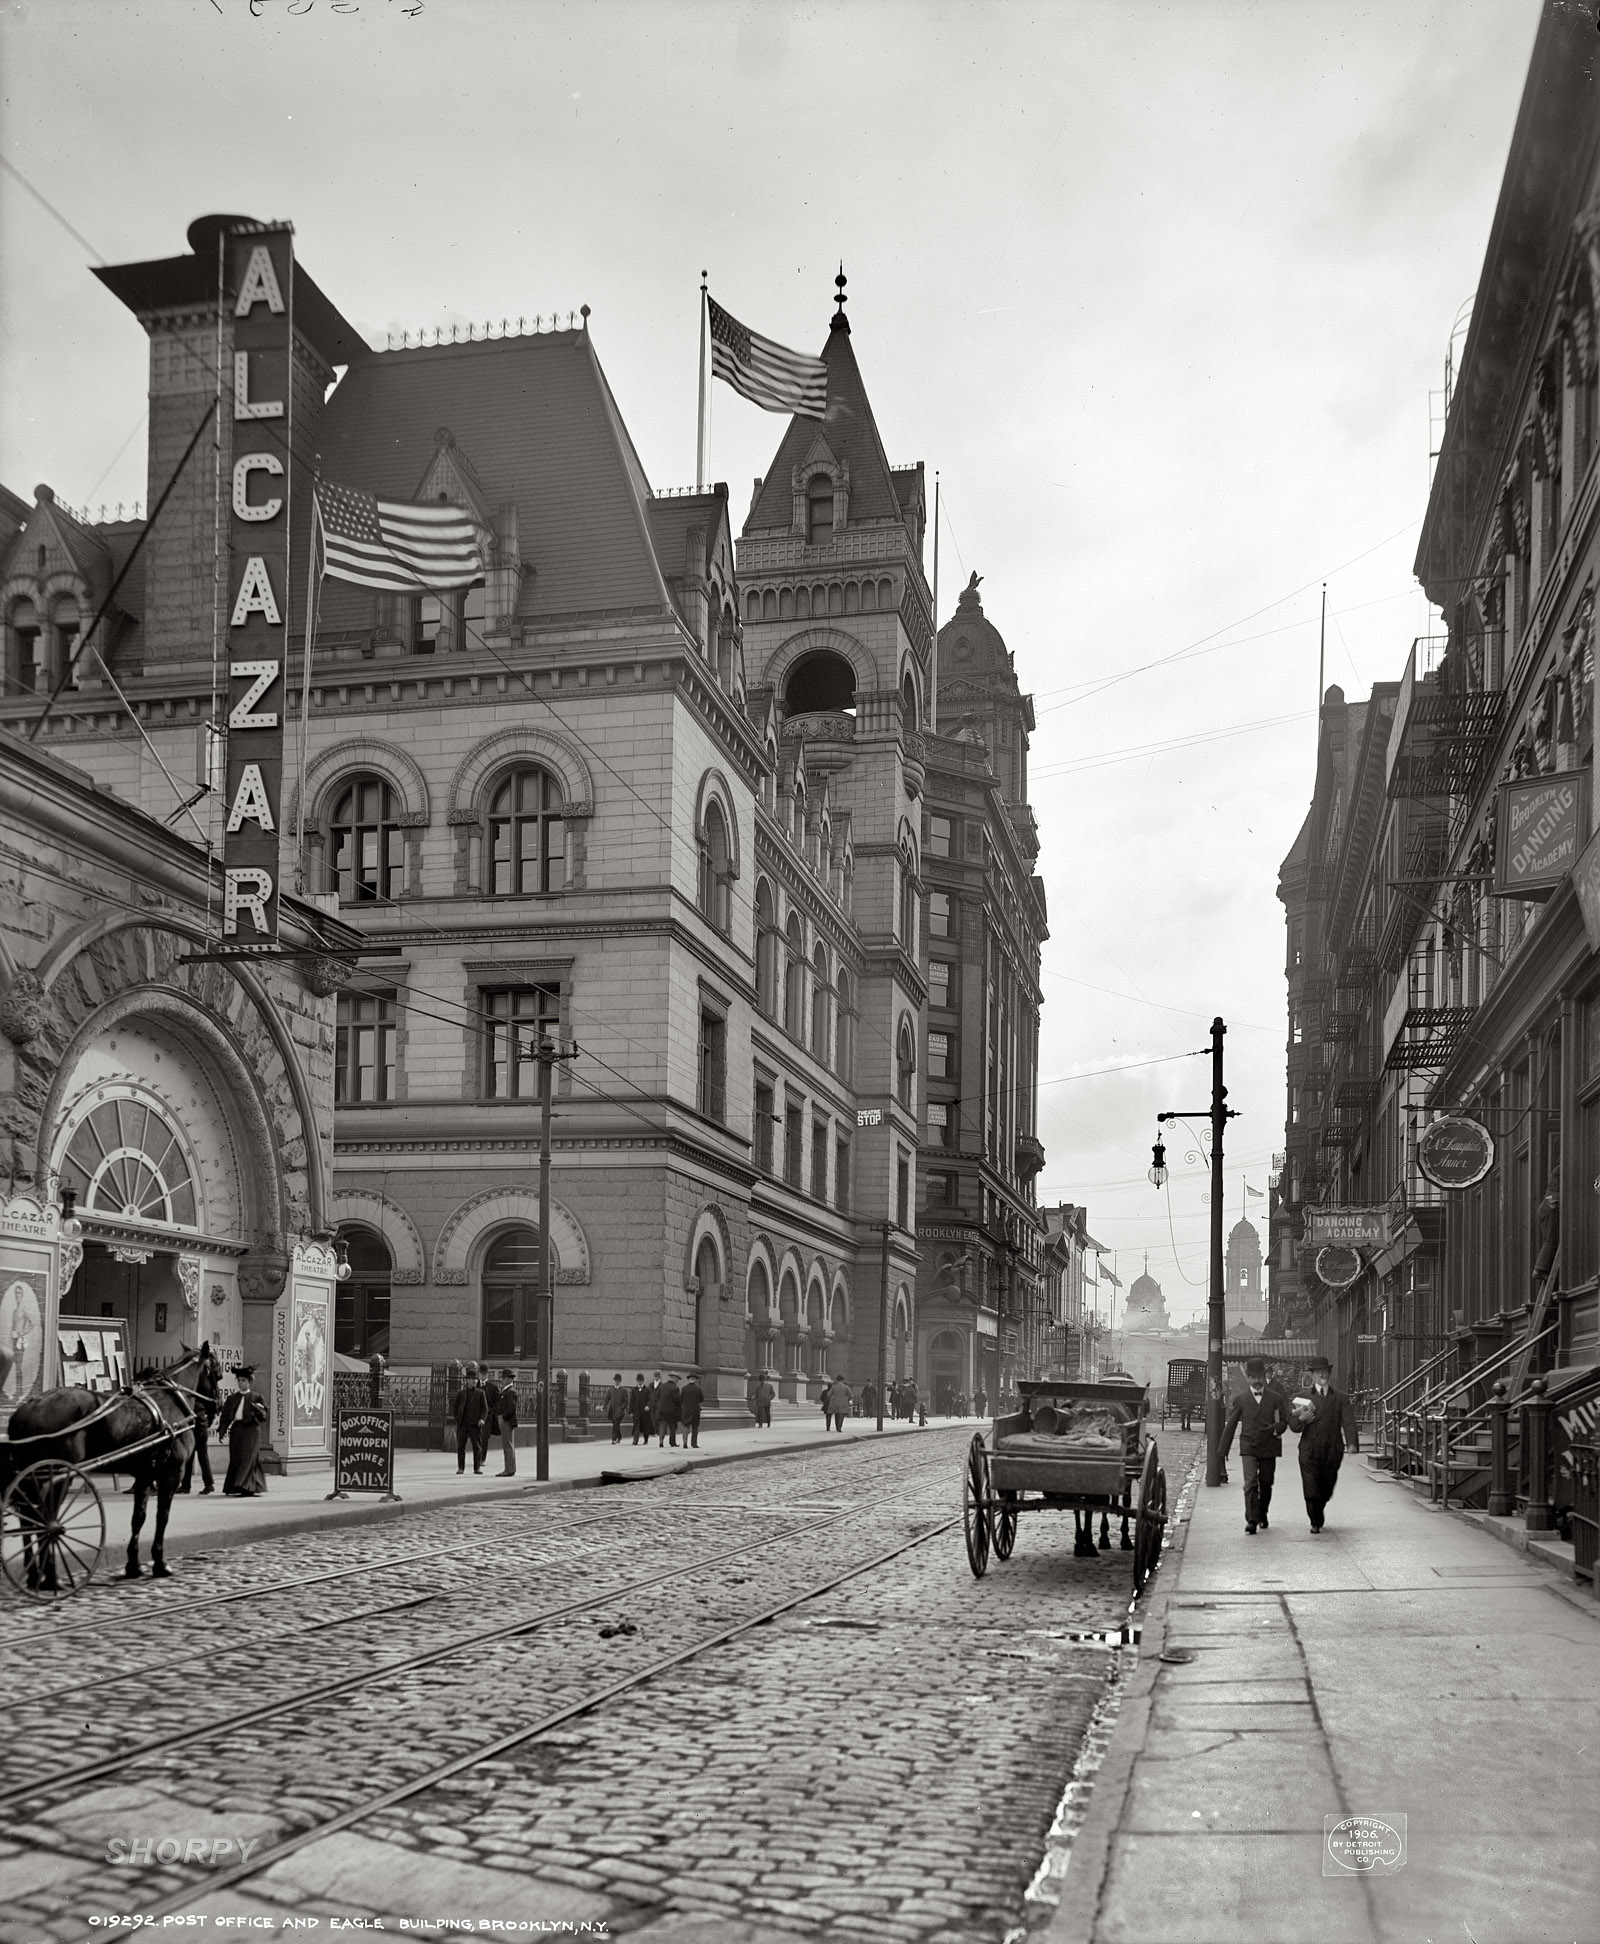 1906. "Post Office and Eagle Building. Brooklyn, N.Y." At the Alcazar Theatre: "smoking concerts." Detroit Publishing Co. glass negative. View full size.